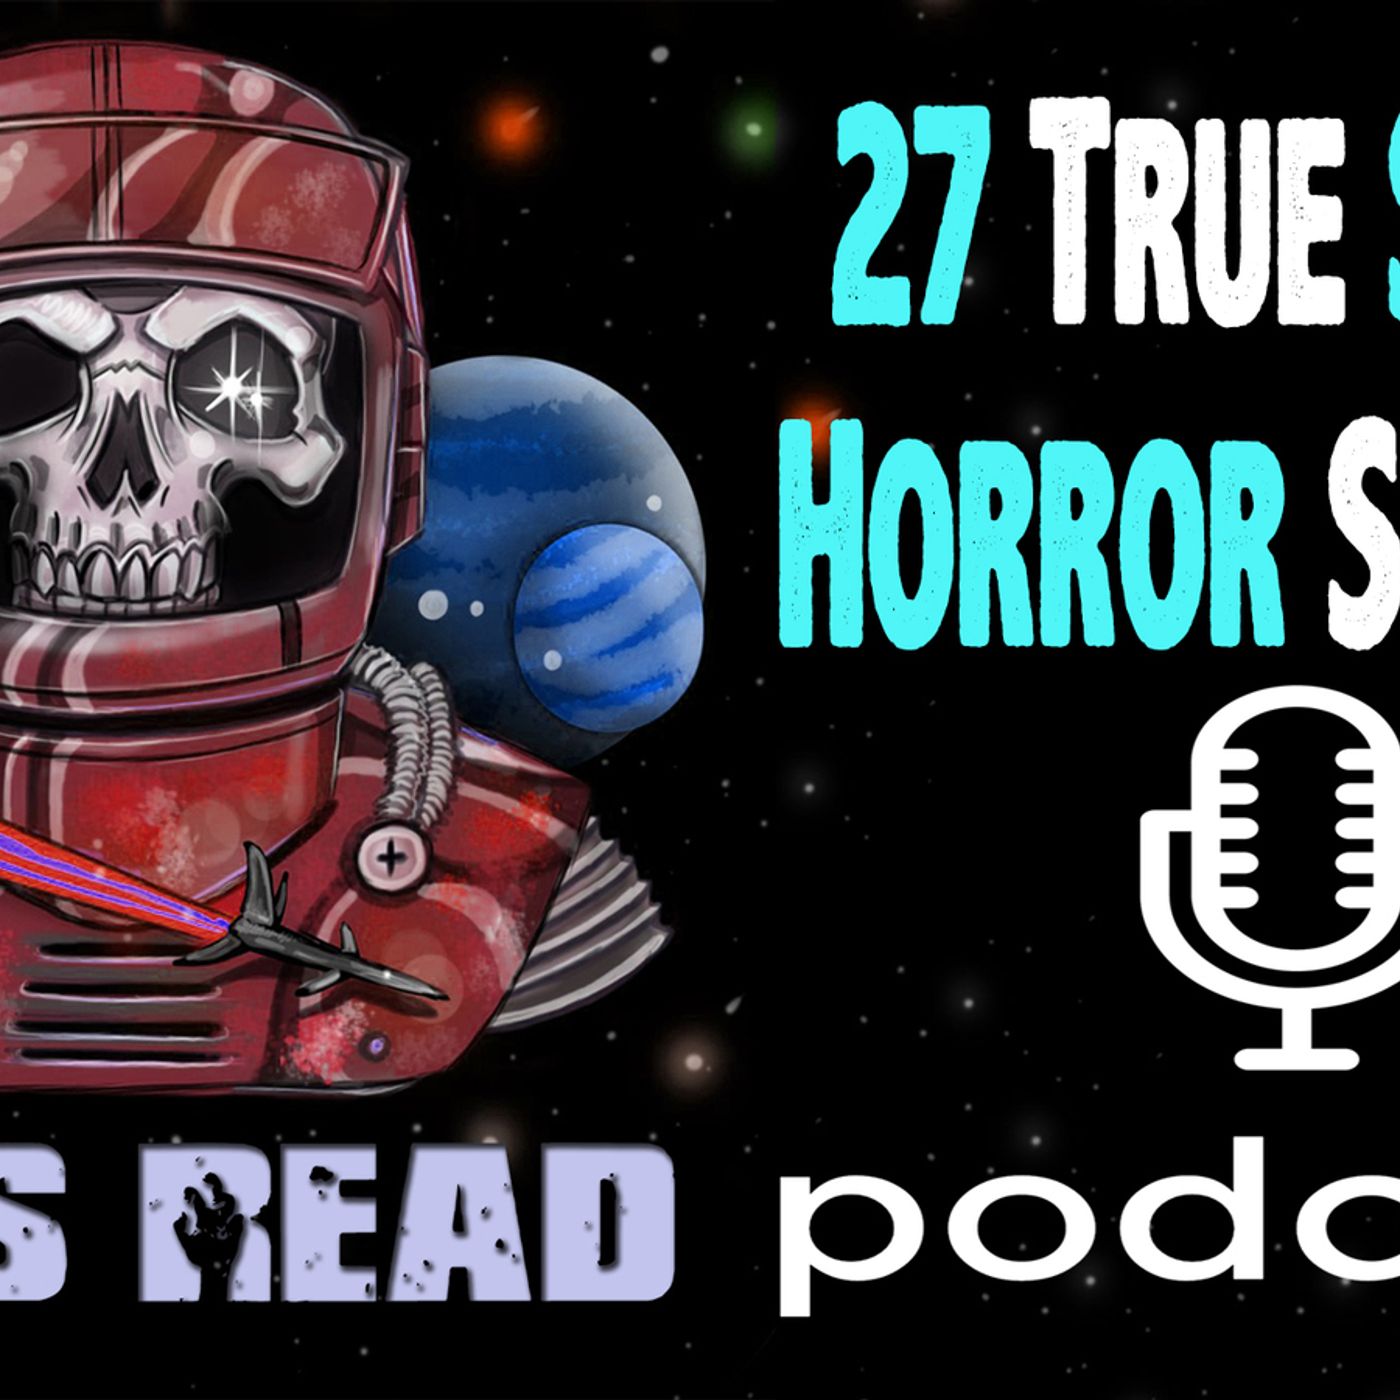 41: Episode 039 | Kidnapping & Highway Horror | 27 True Scary Horror Stories